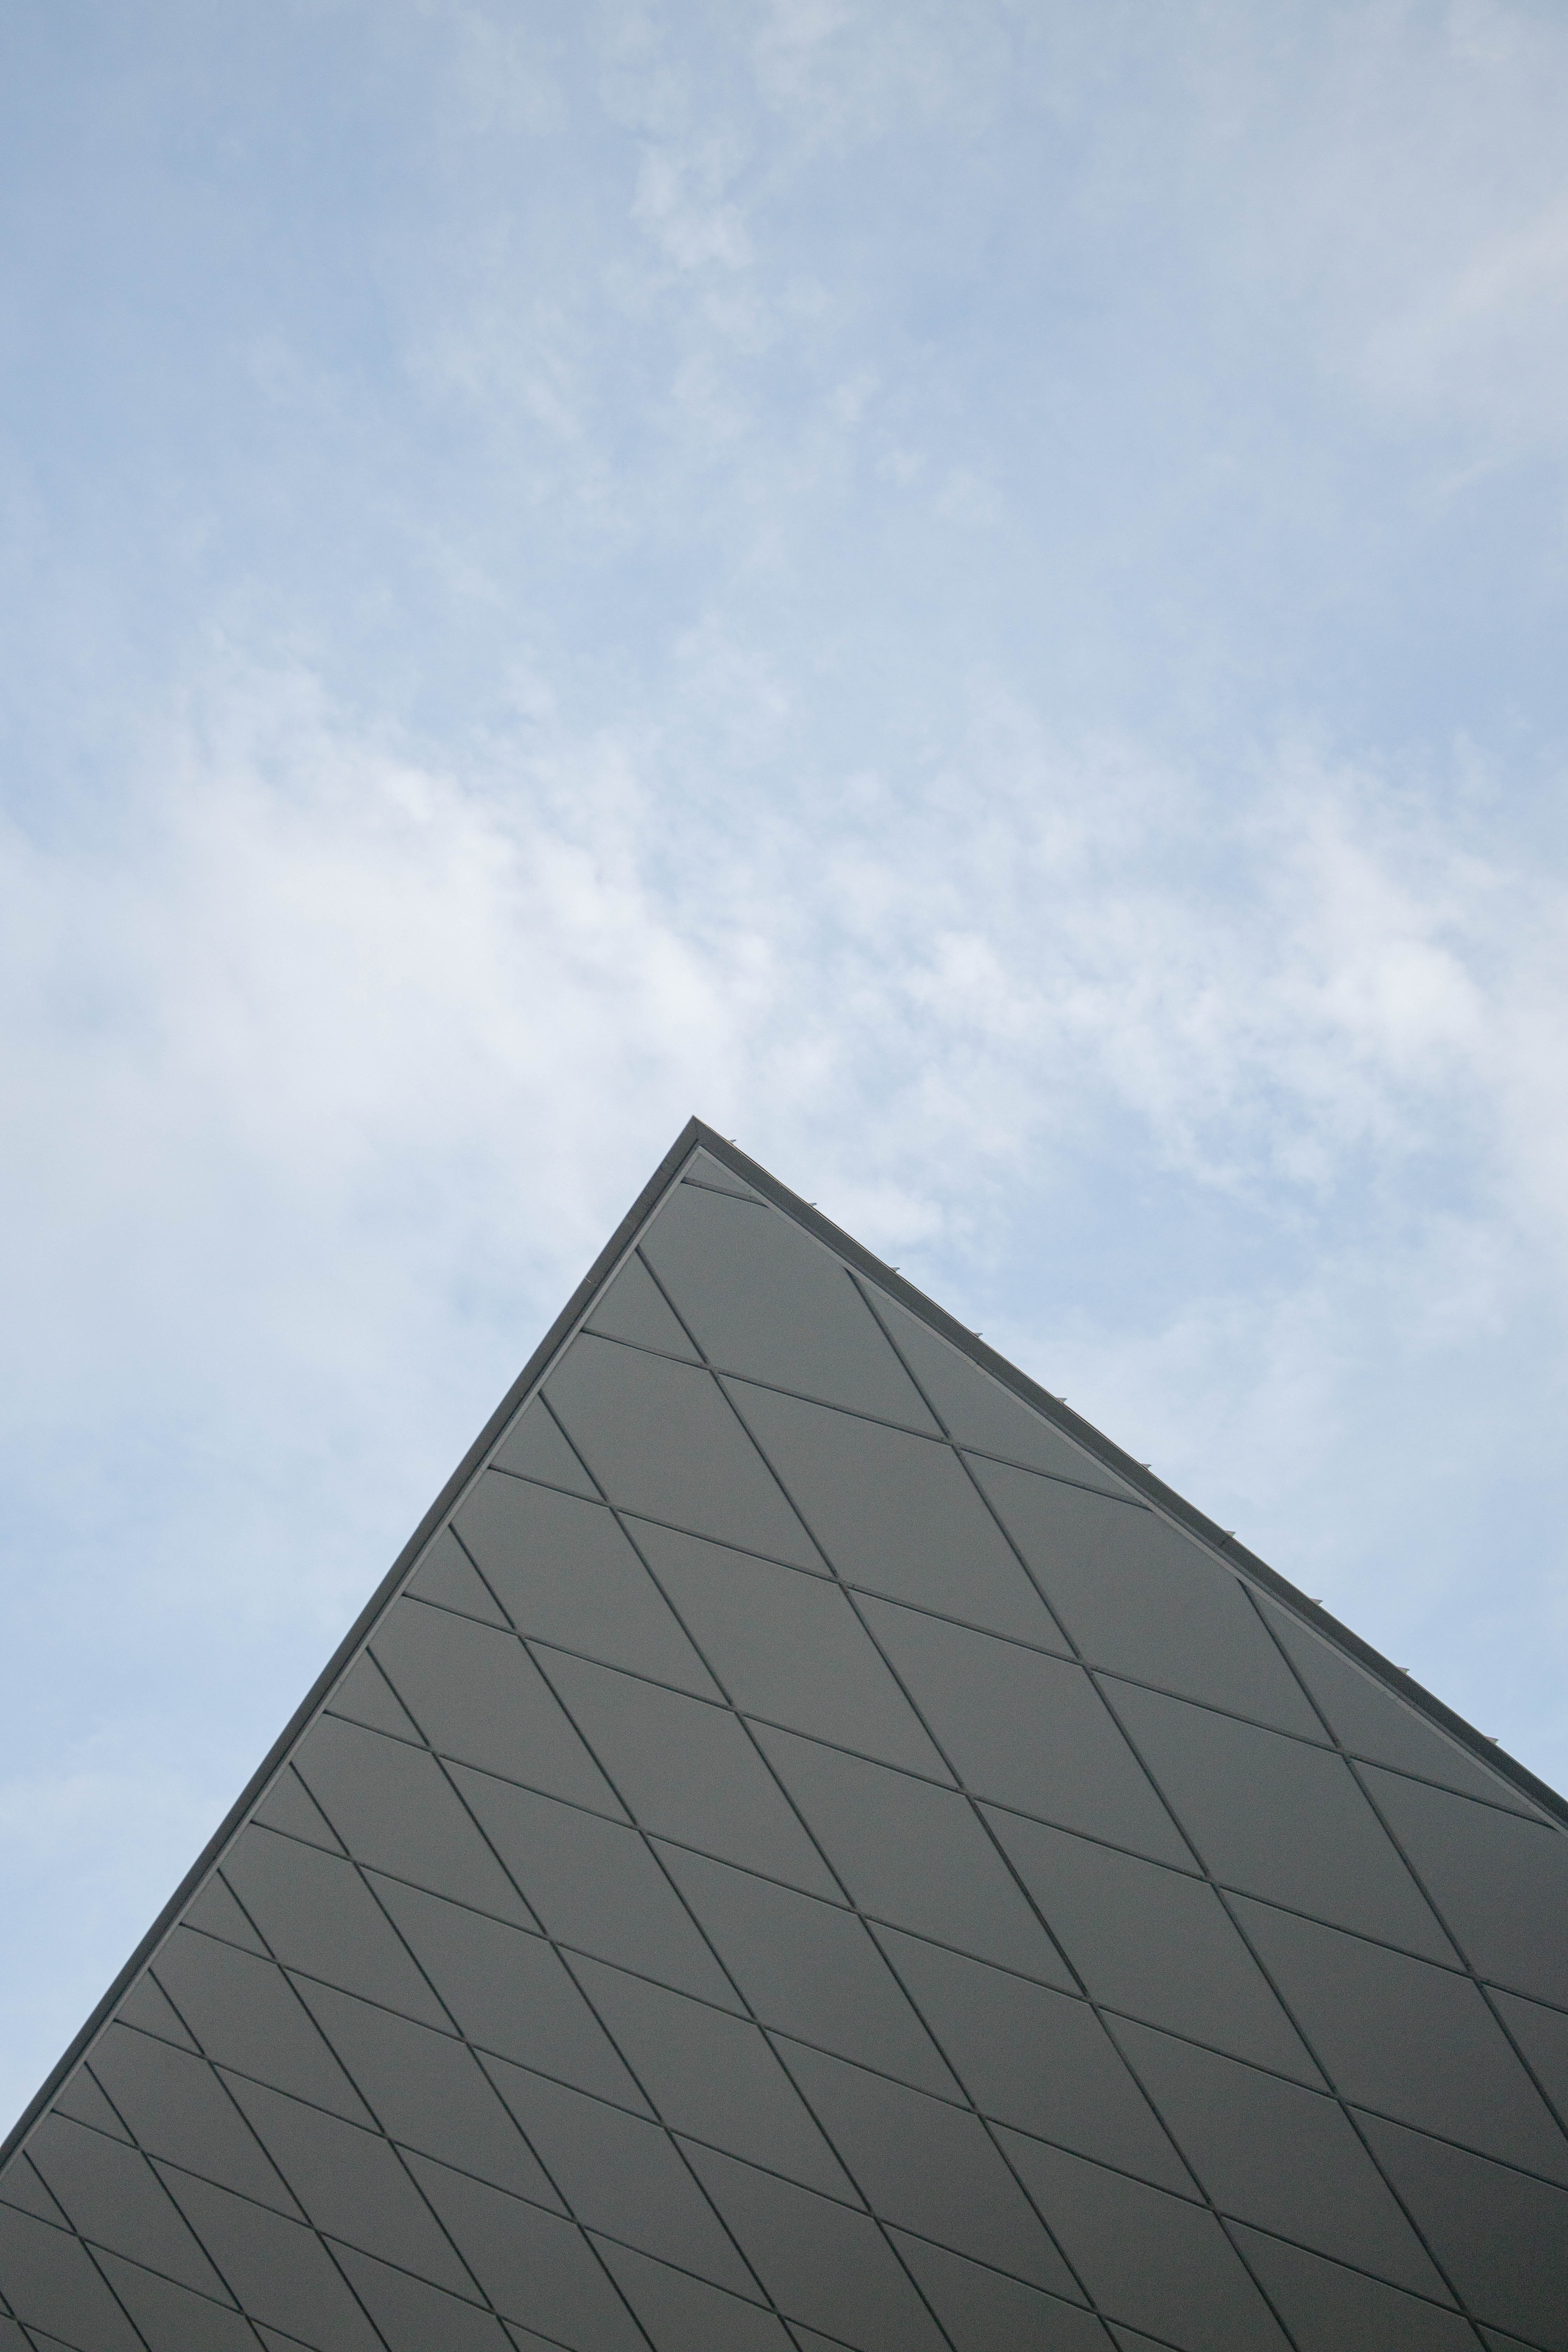 74685 Screensavers and Wallpapers Pyramid for phone. Download sky, minimalism, angle, corner, pyramid pictures for free